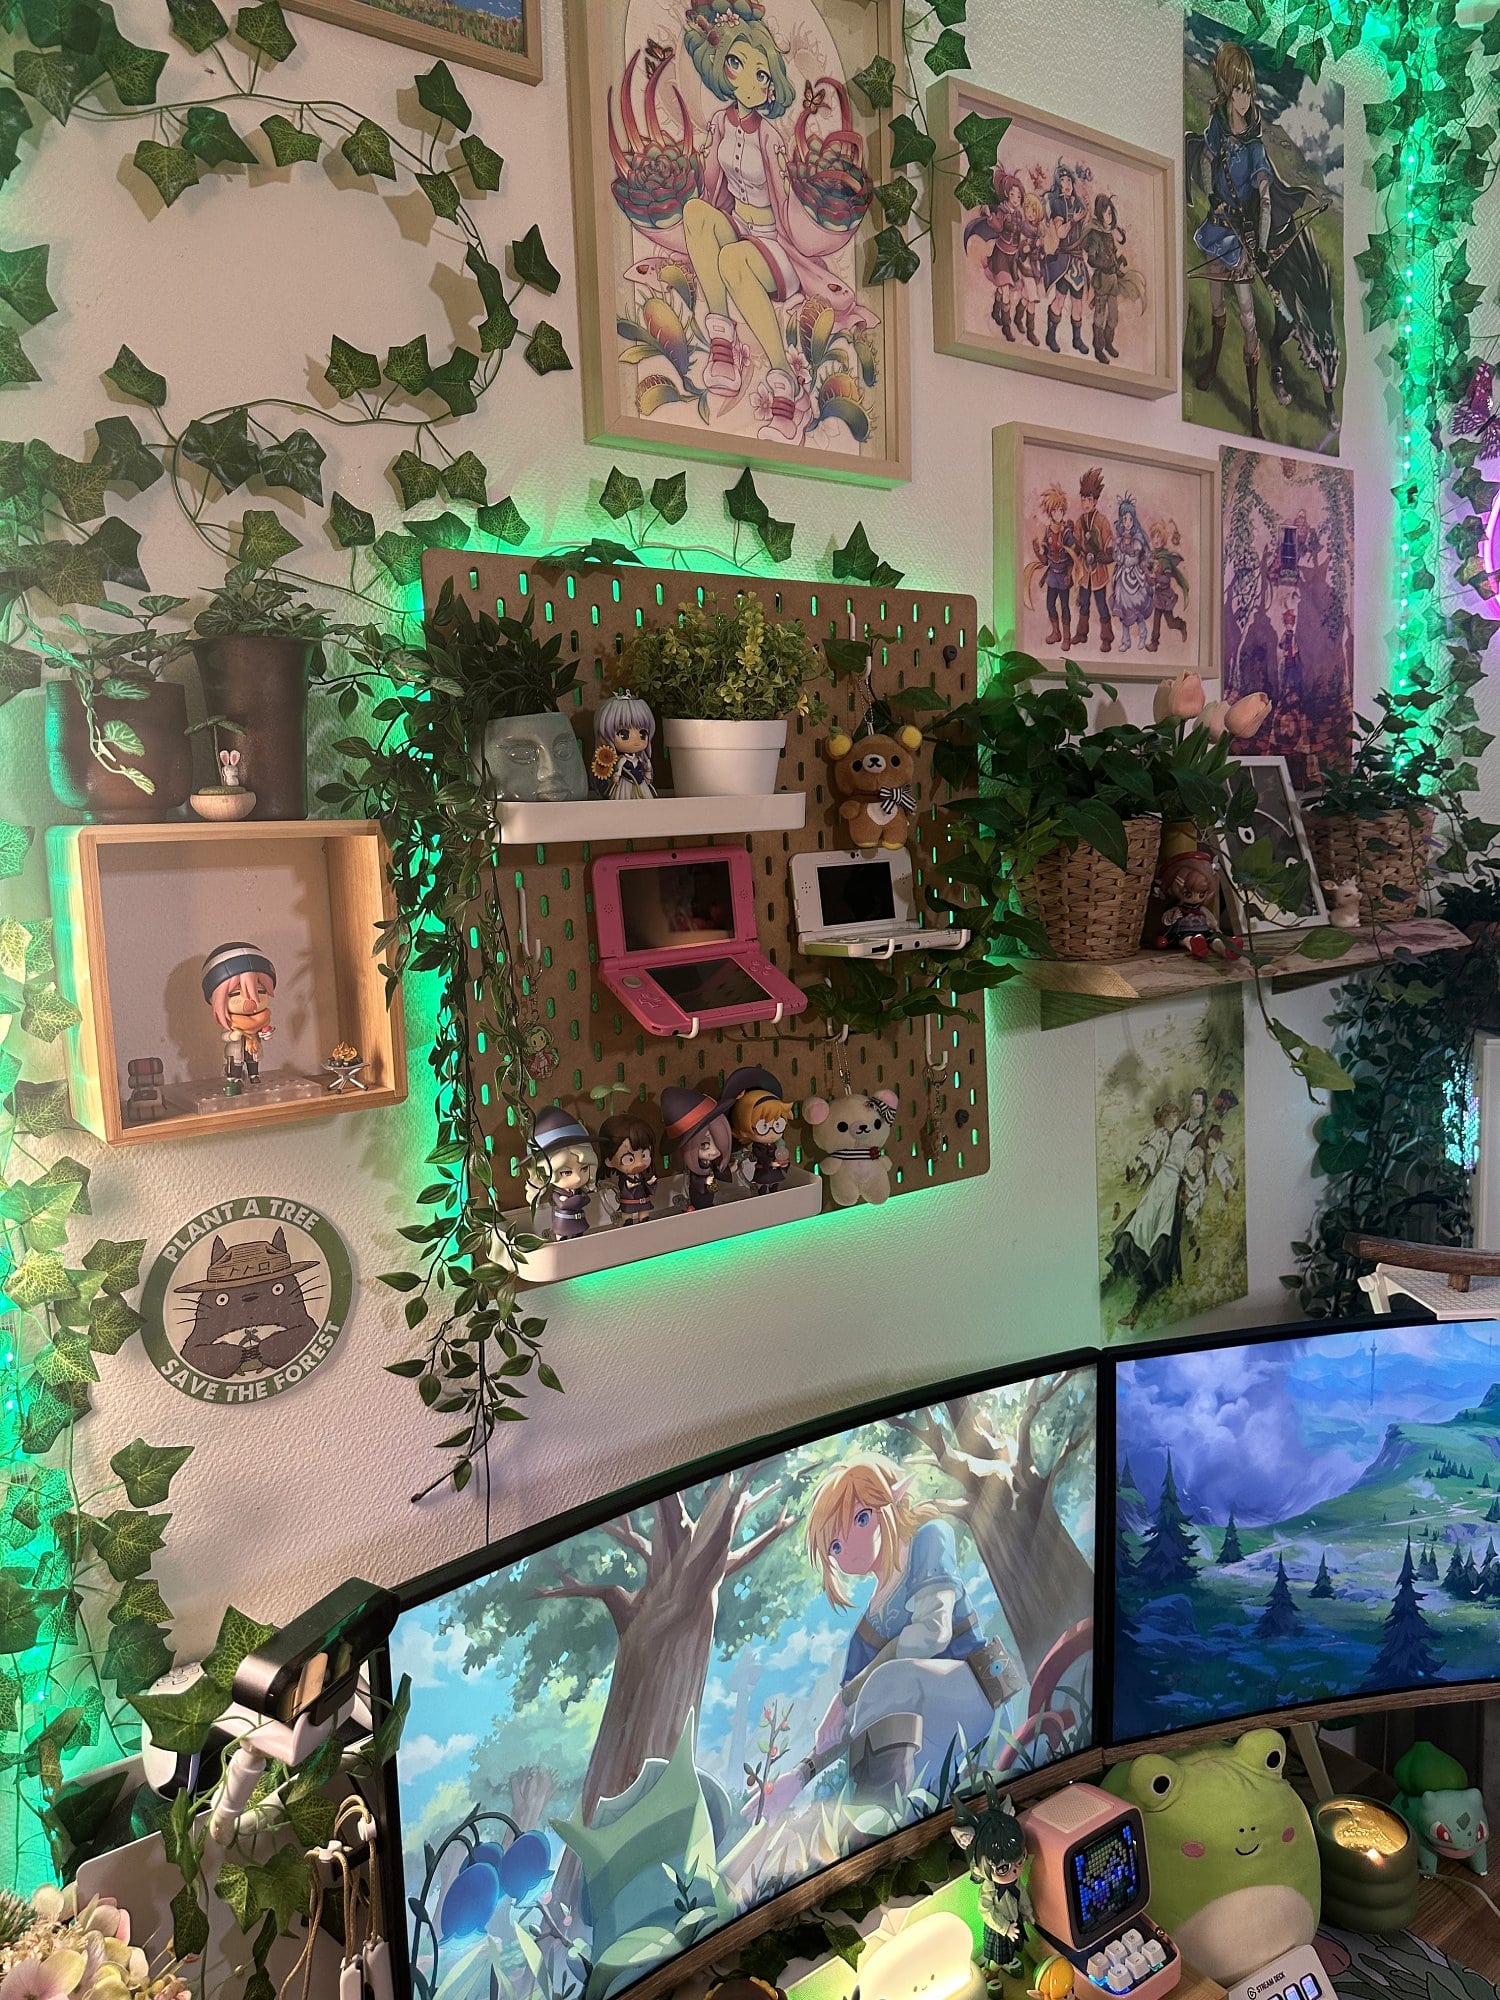 A cosy anime- and Zelda-inspired multiple screen battlestation with lots of figurines, artificial plants, and wall art